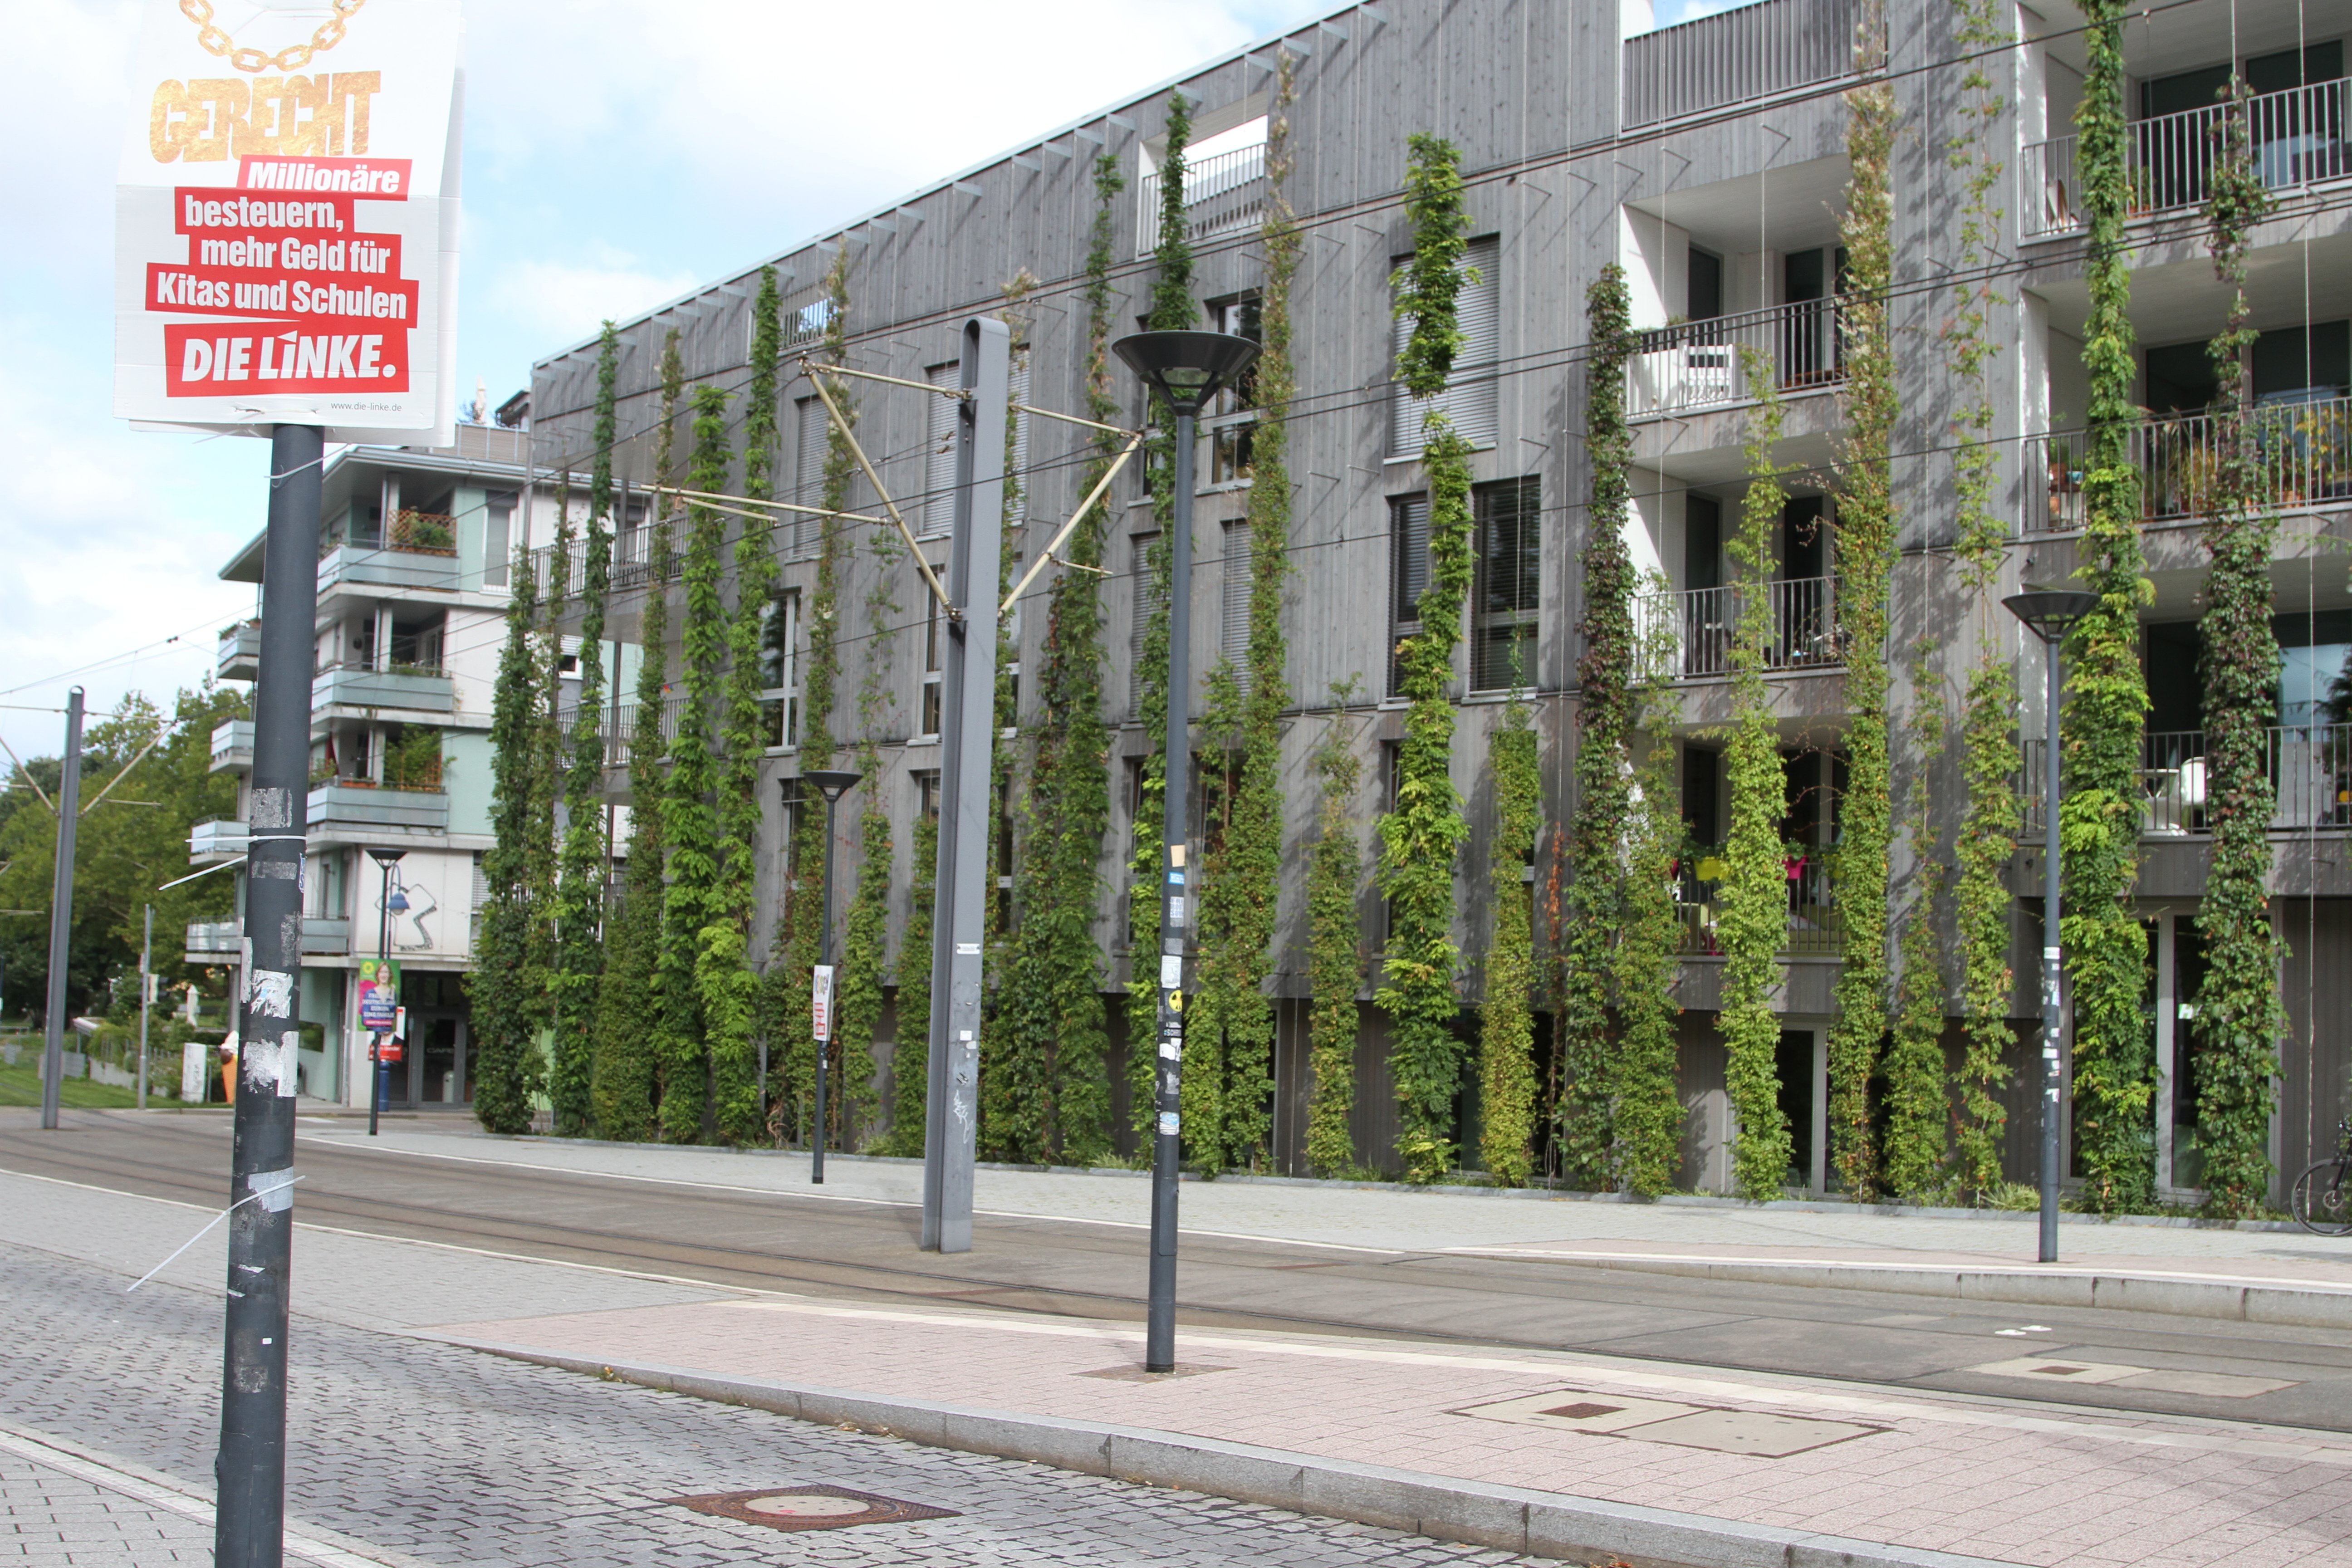 A wide four-story building, enveloped by green vines.